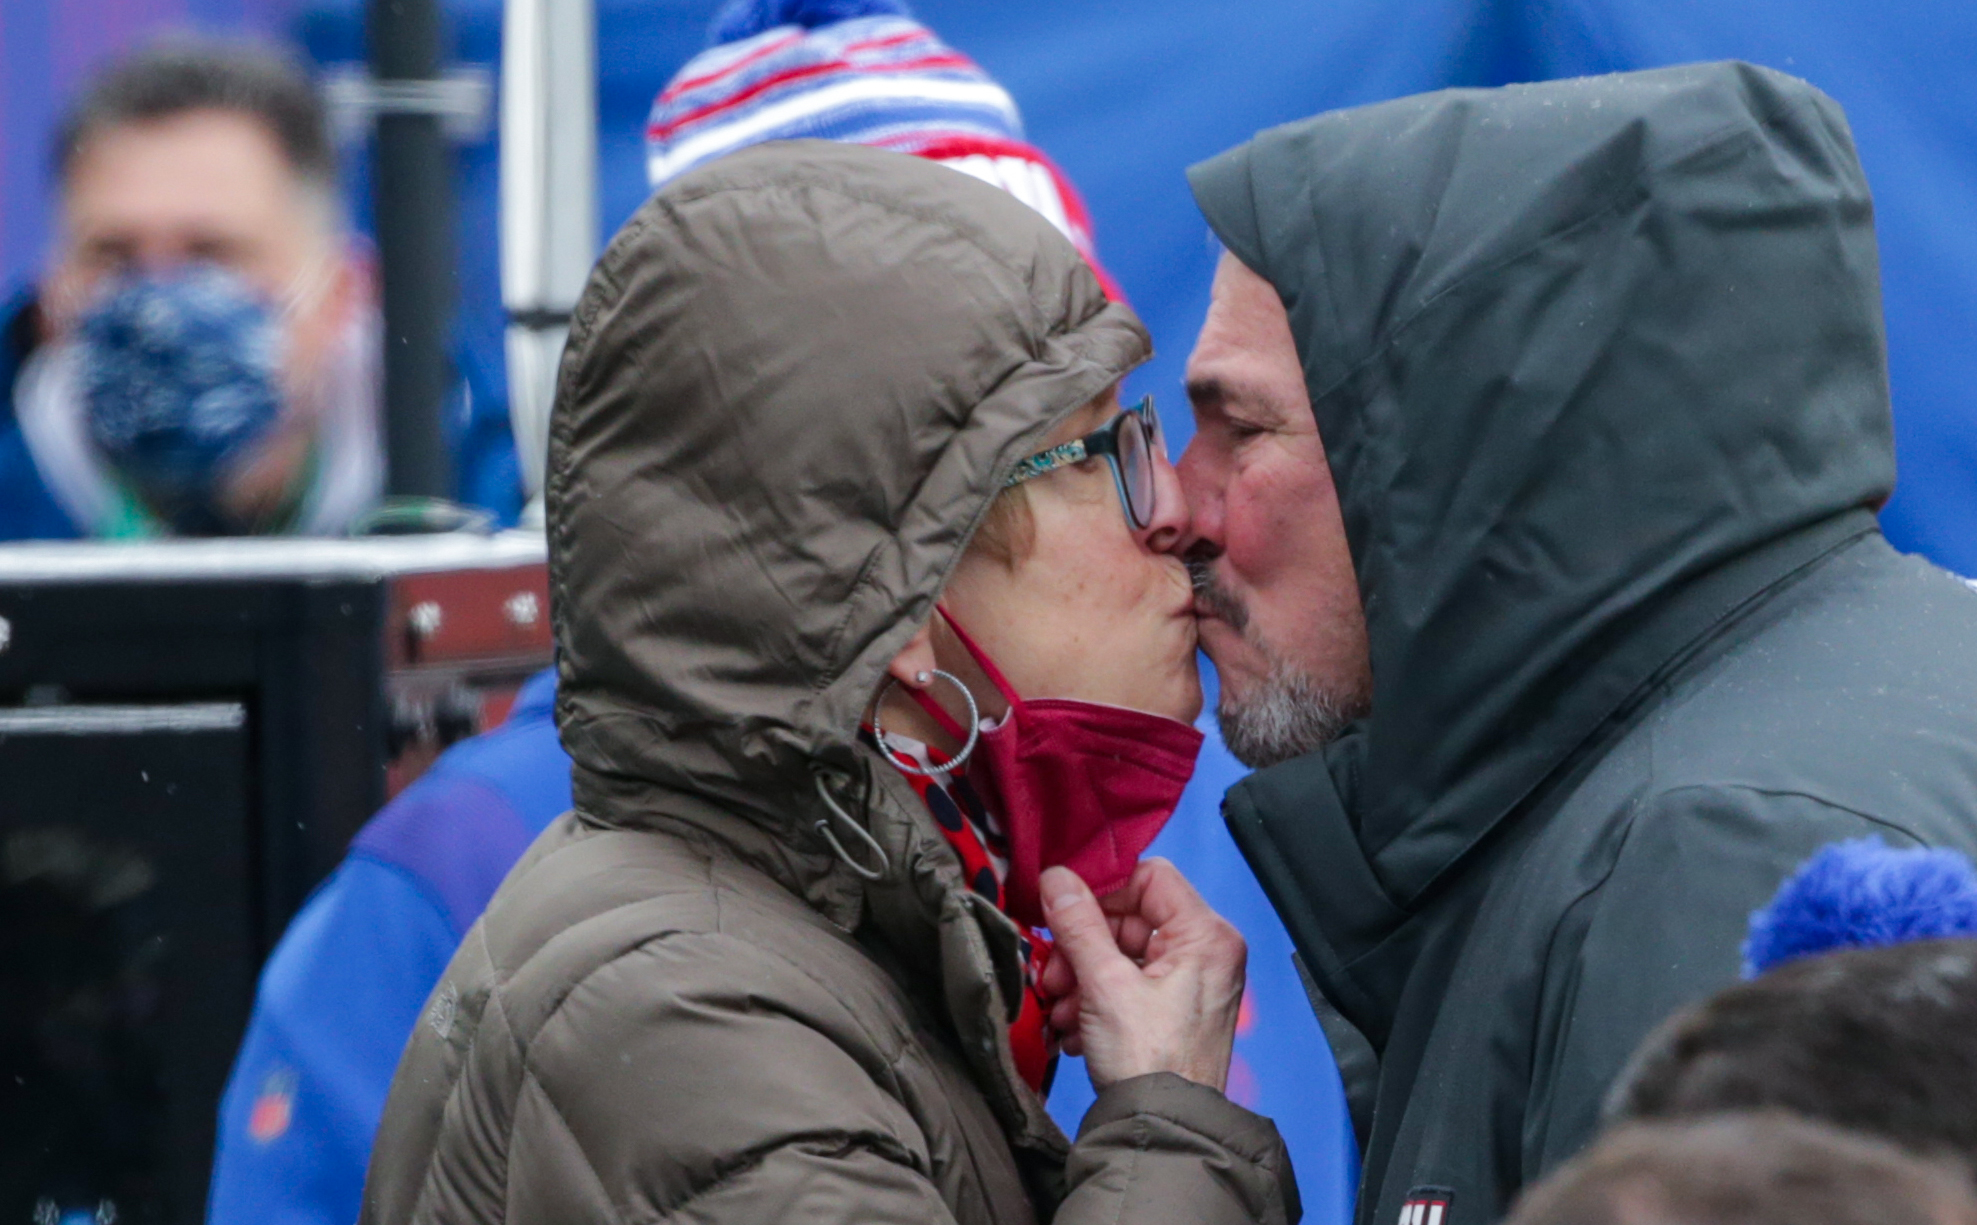 New York Giants Dave Gettleman gets a kiss from his wife, Joanne, as his family joins the embattled general manager during pregame warmups as the Giants prepare to host the Washington Football Team on Sunday, Jan. 9, 2022 in East Rutherford, N.J.